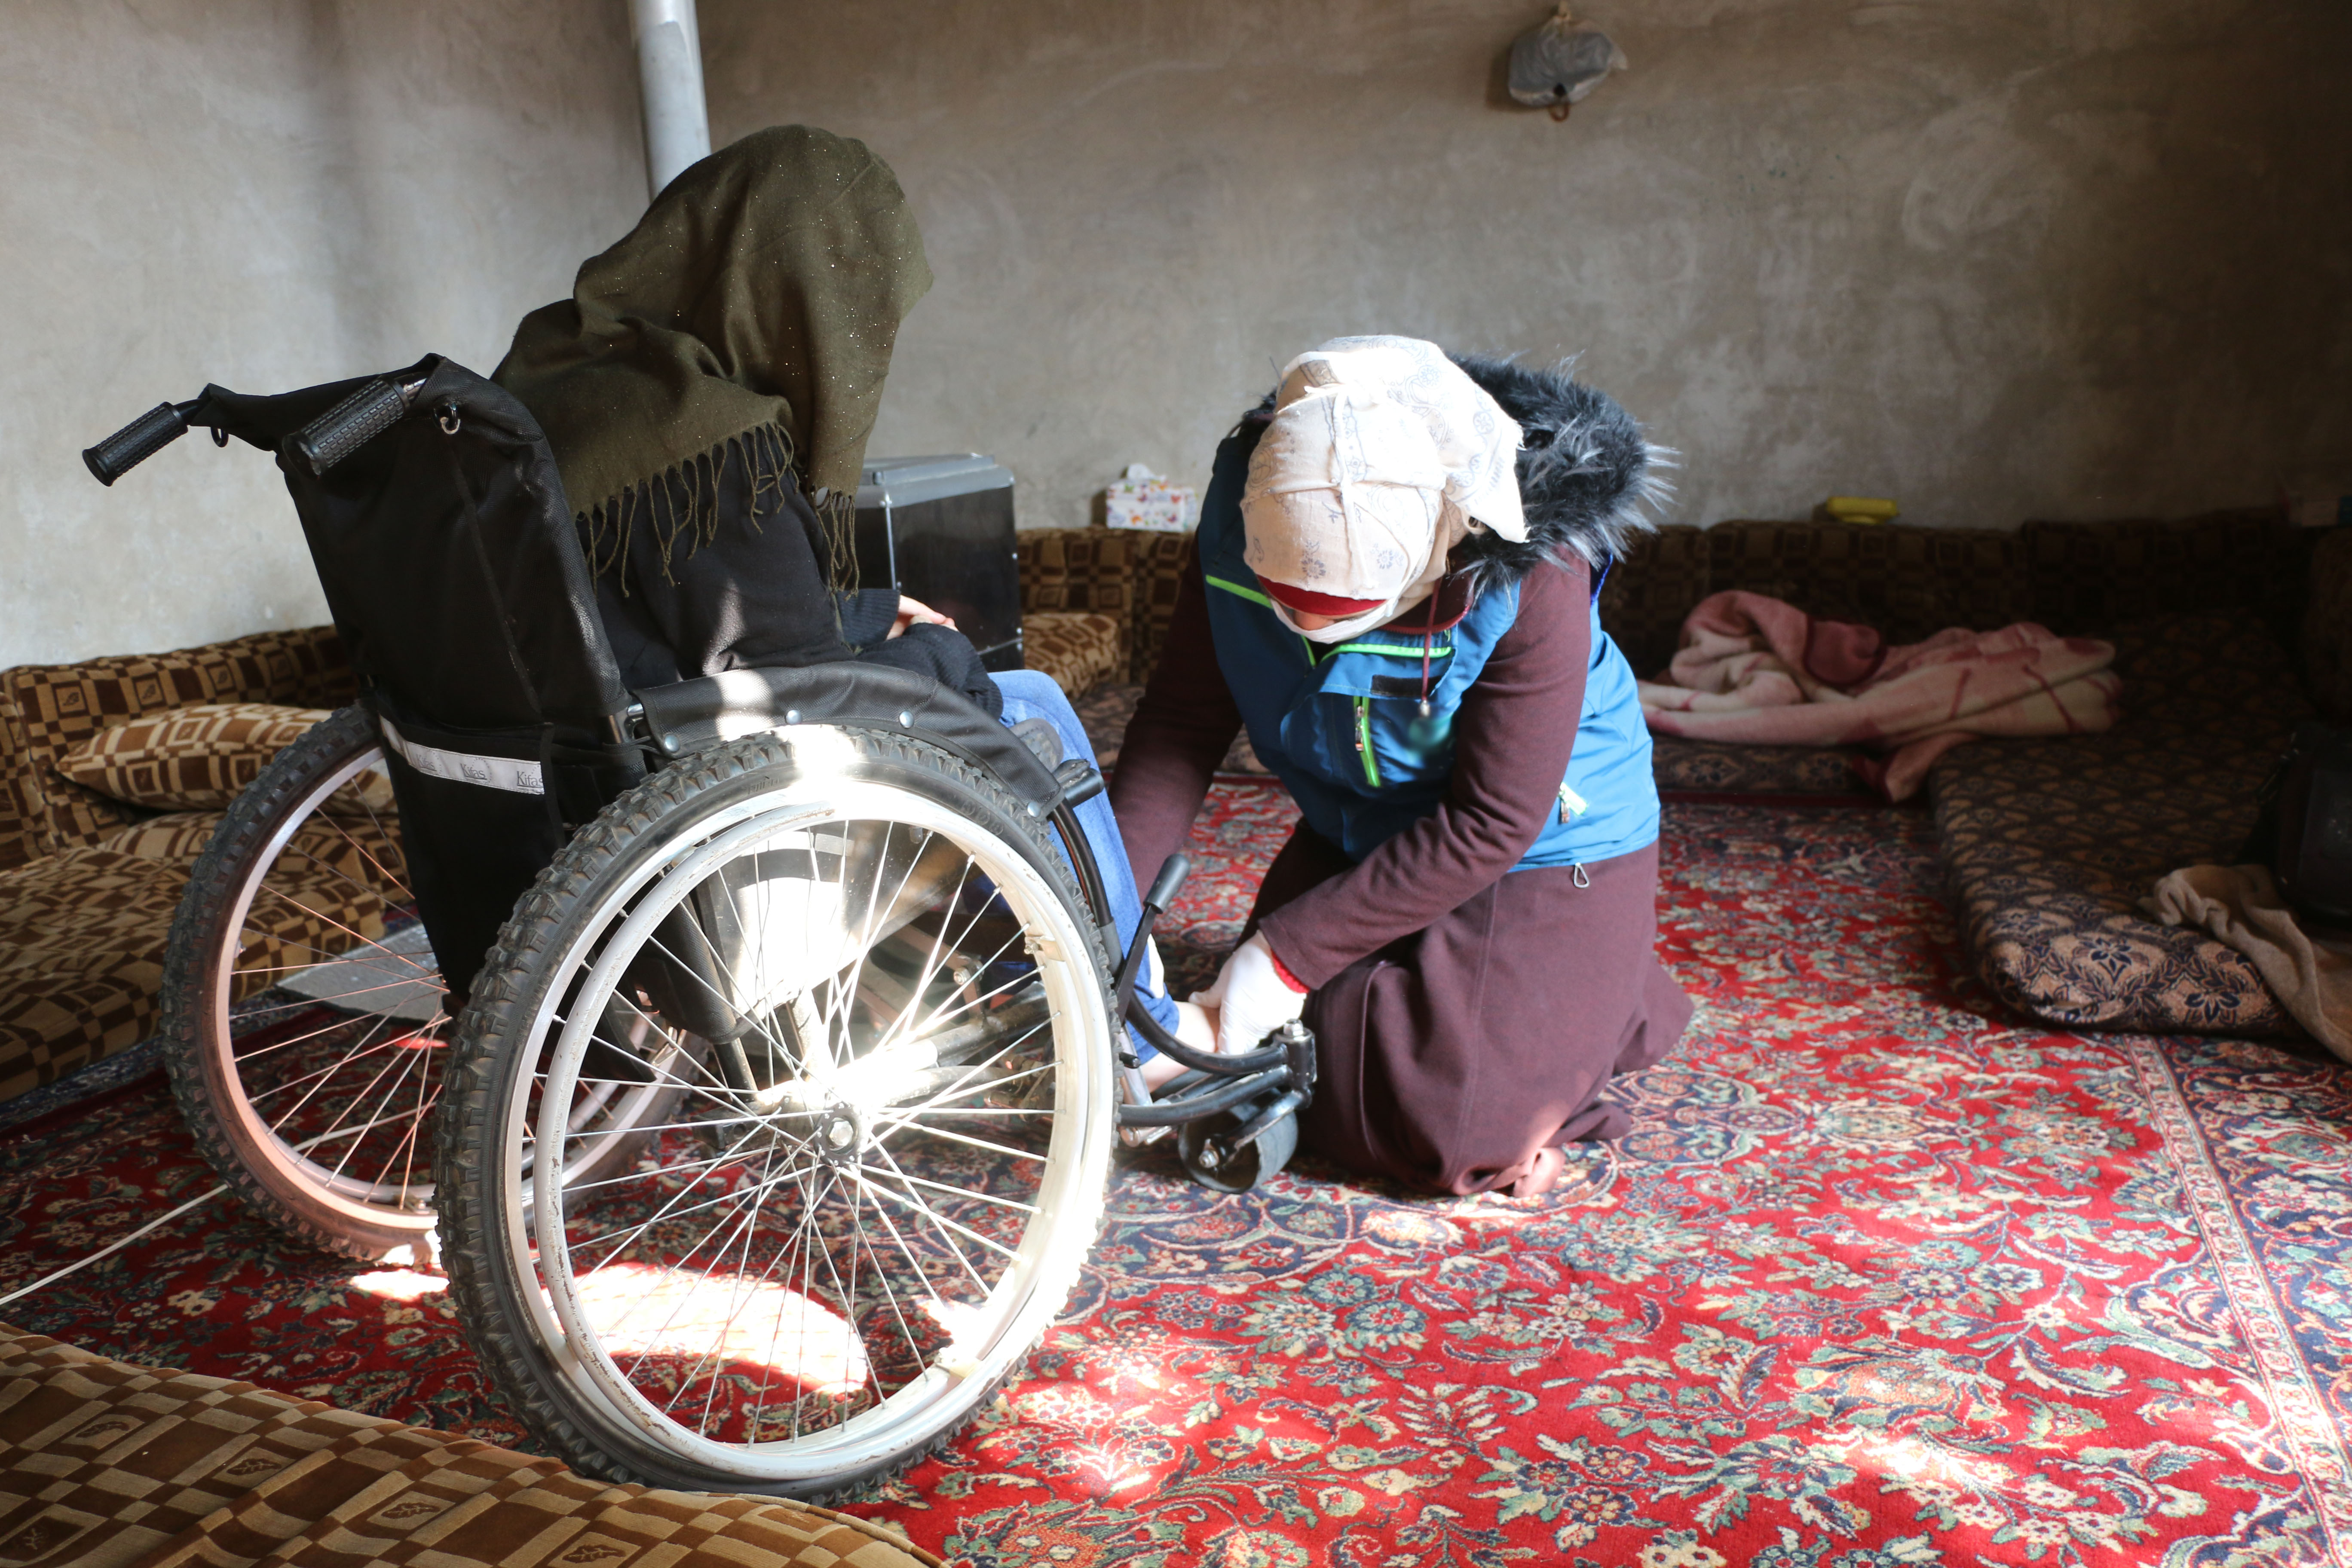 A woman with a disability received a wheelchair provided through funds from European Union Humanitarian Aid.